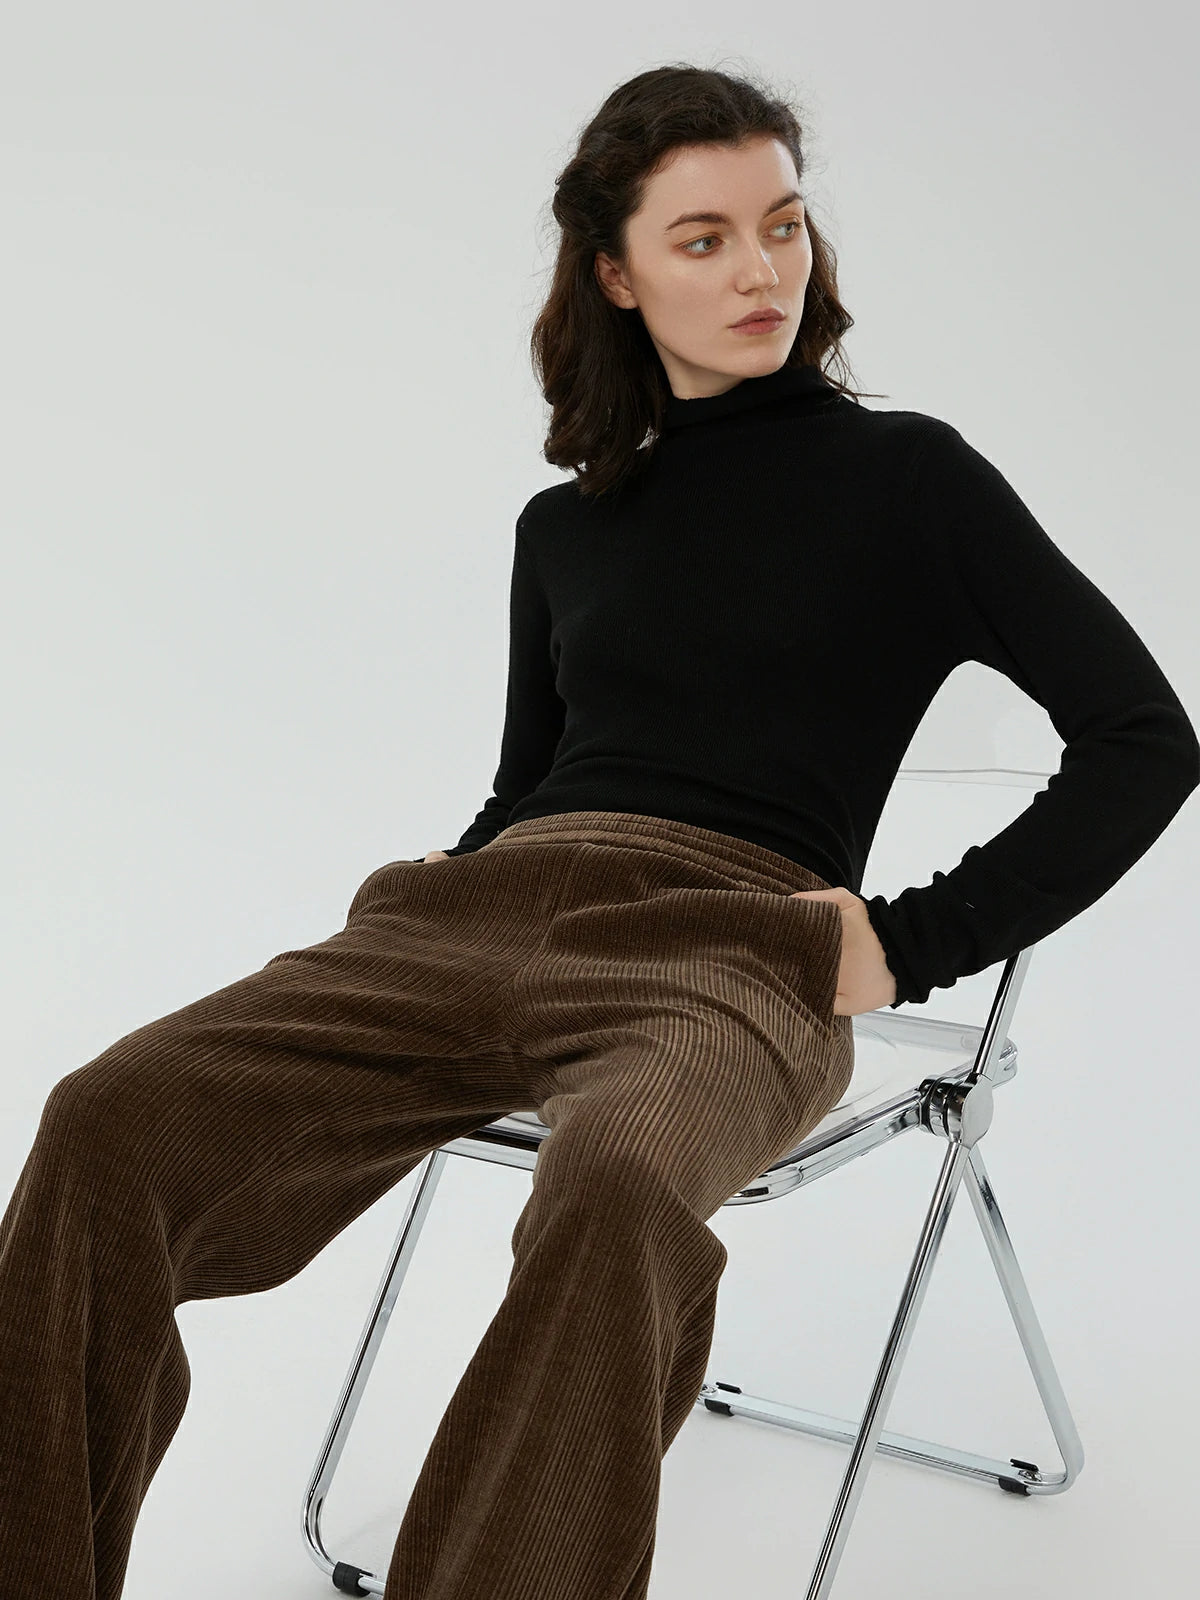 Brown corduroy trousers: A balance of comfort, style, and timeless fashion.